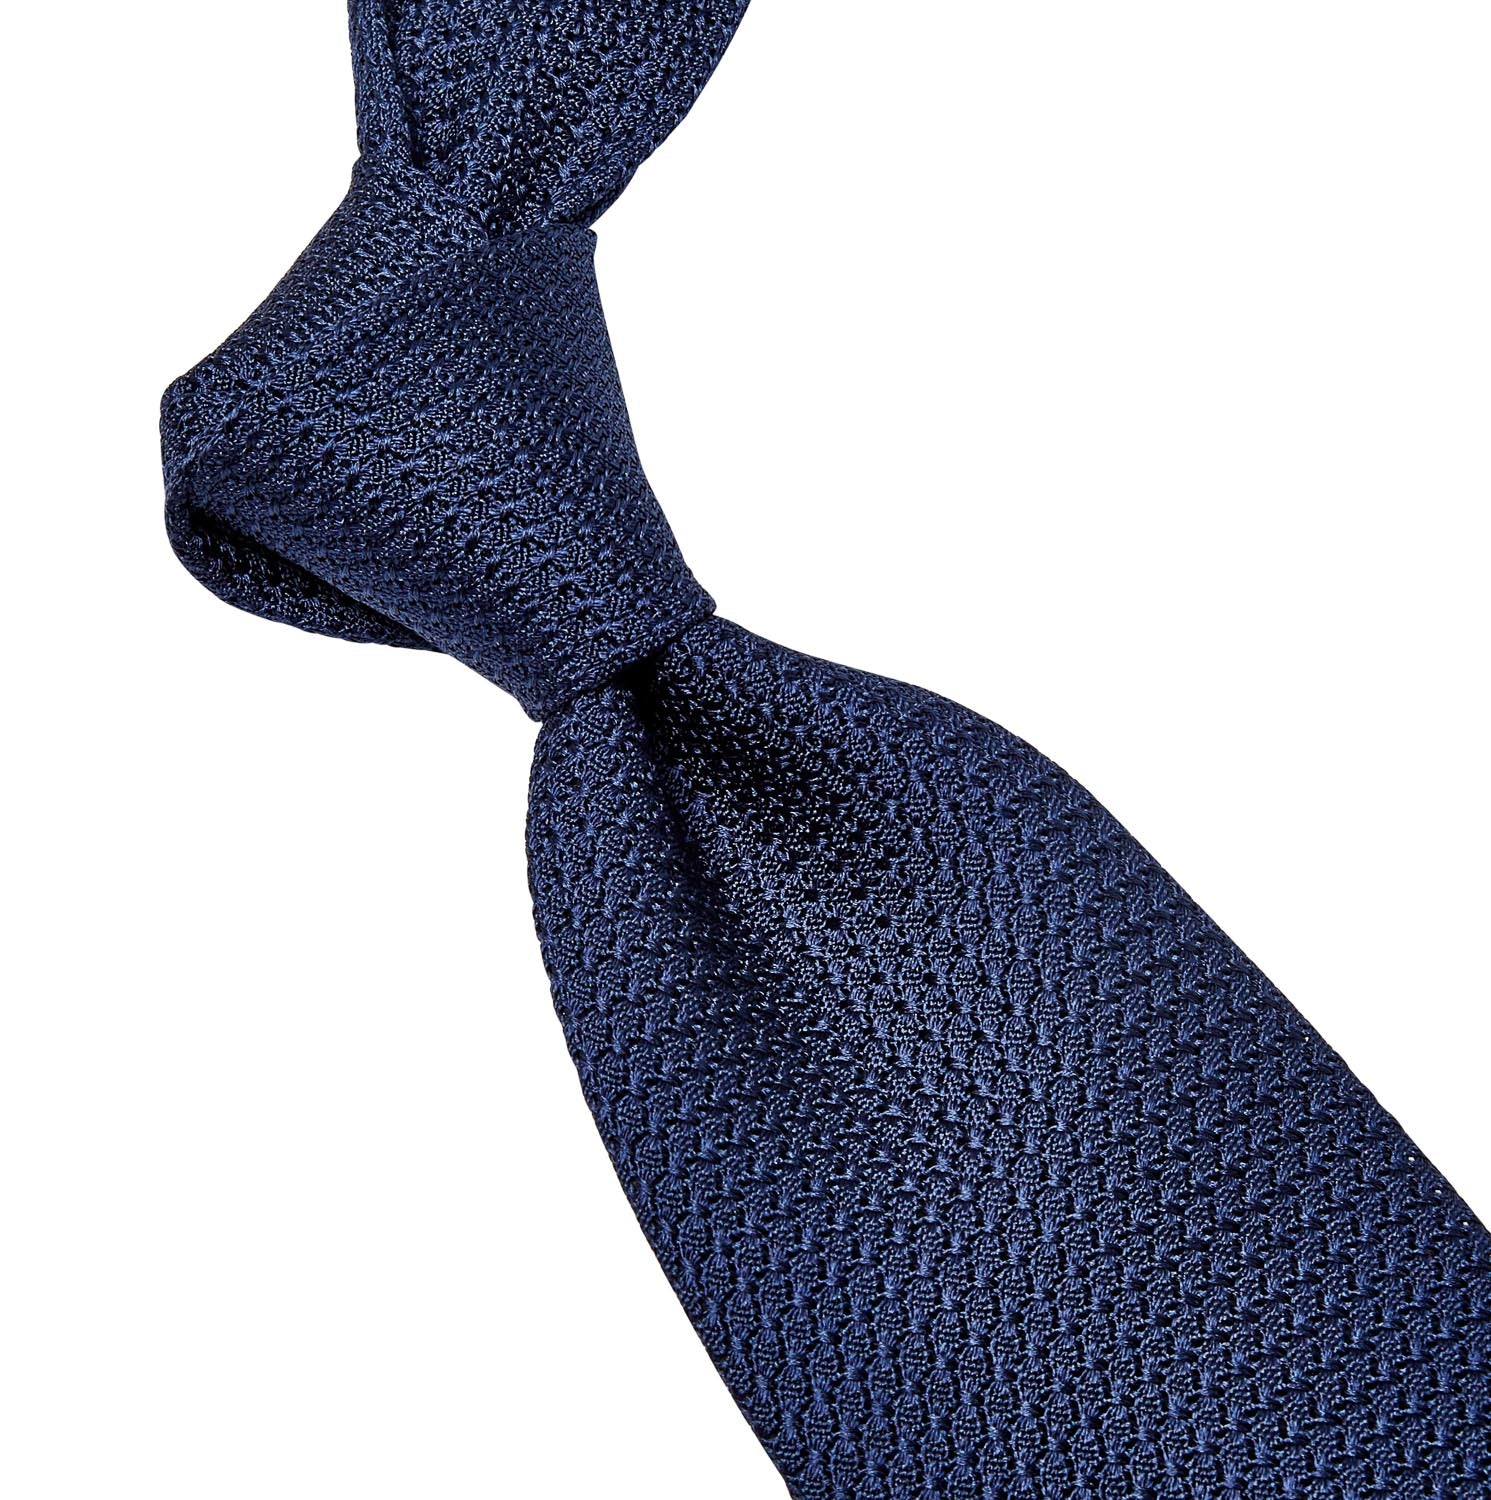 A quality Sovereign Grade Grenadine Grossa Navy Blue tie on a white background, crafted in the United Kingdom by KirbyAllison.com.